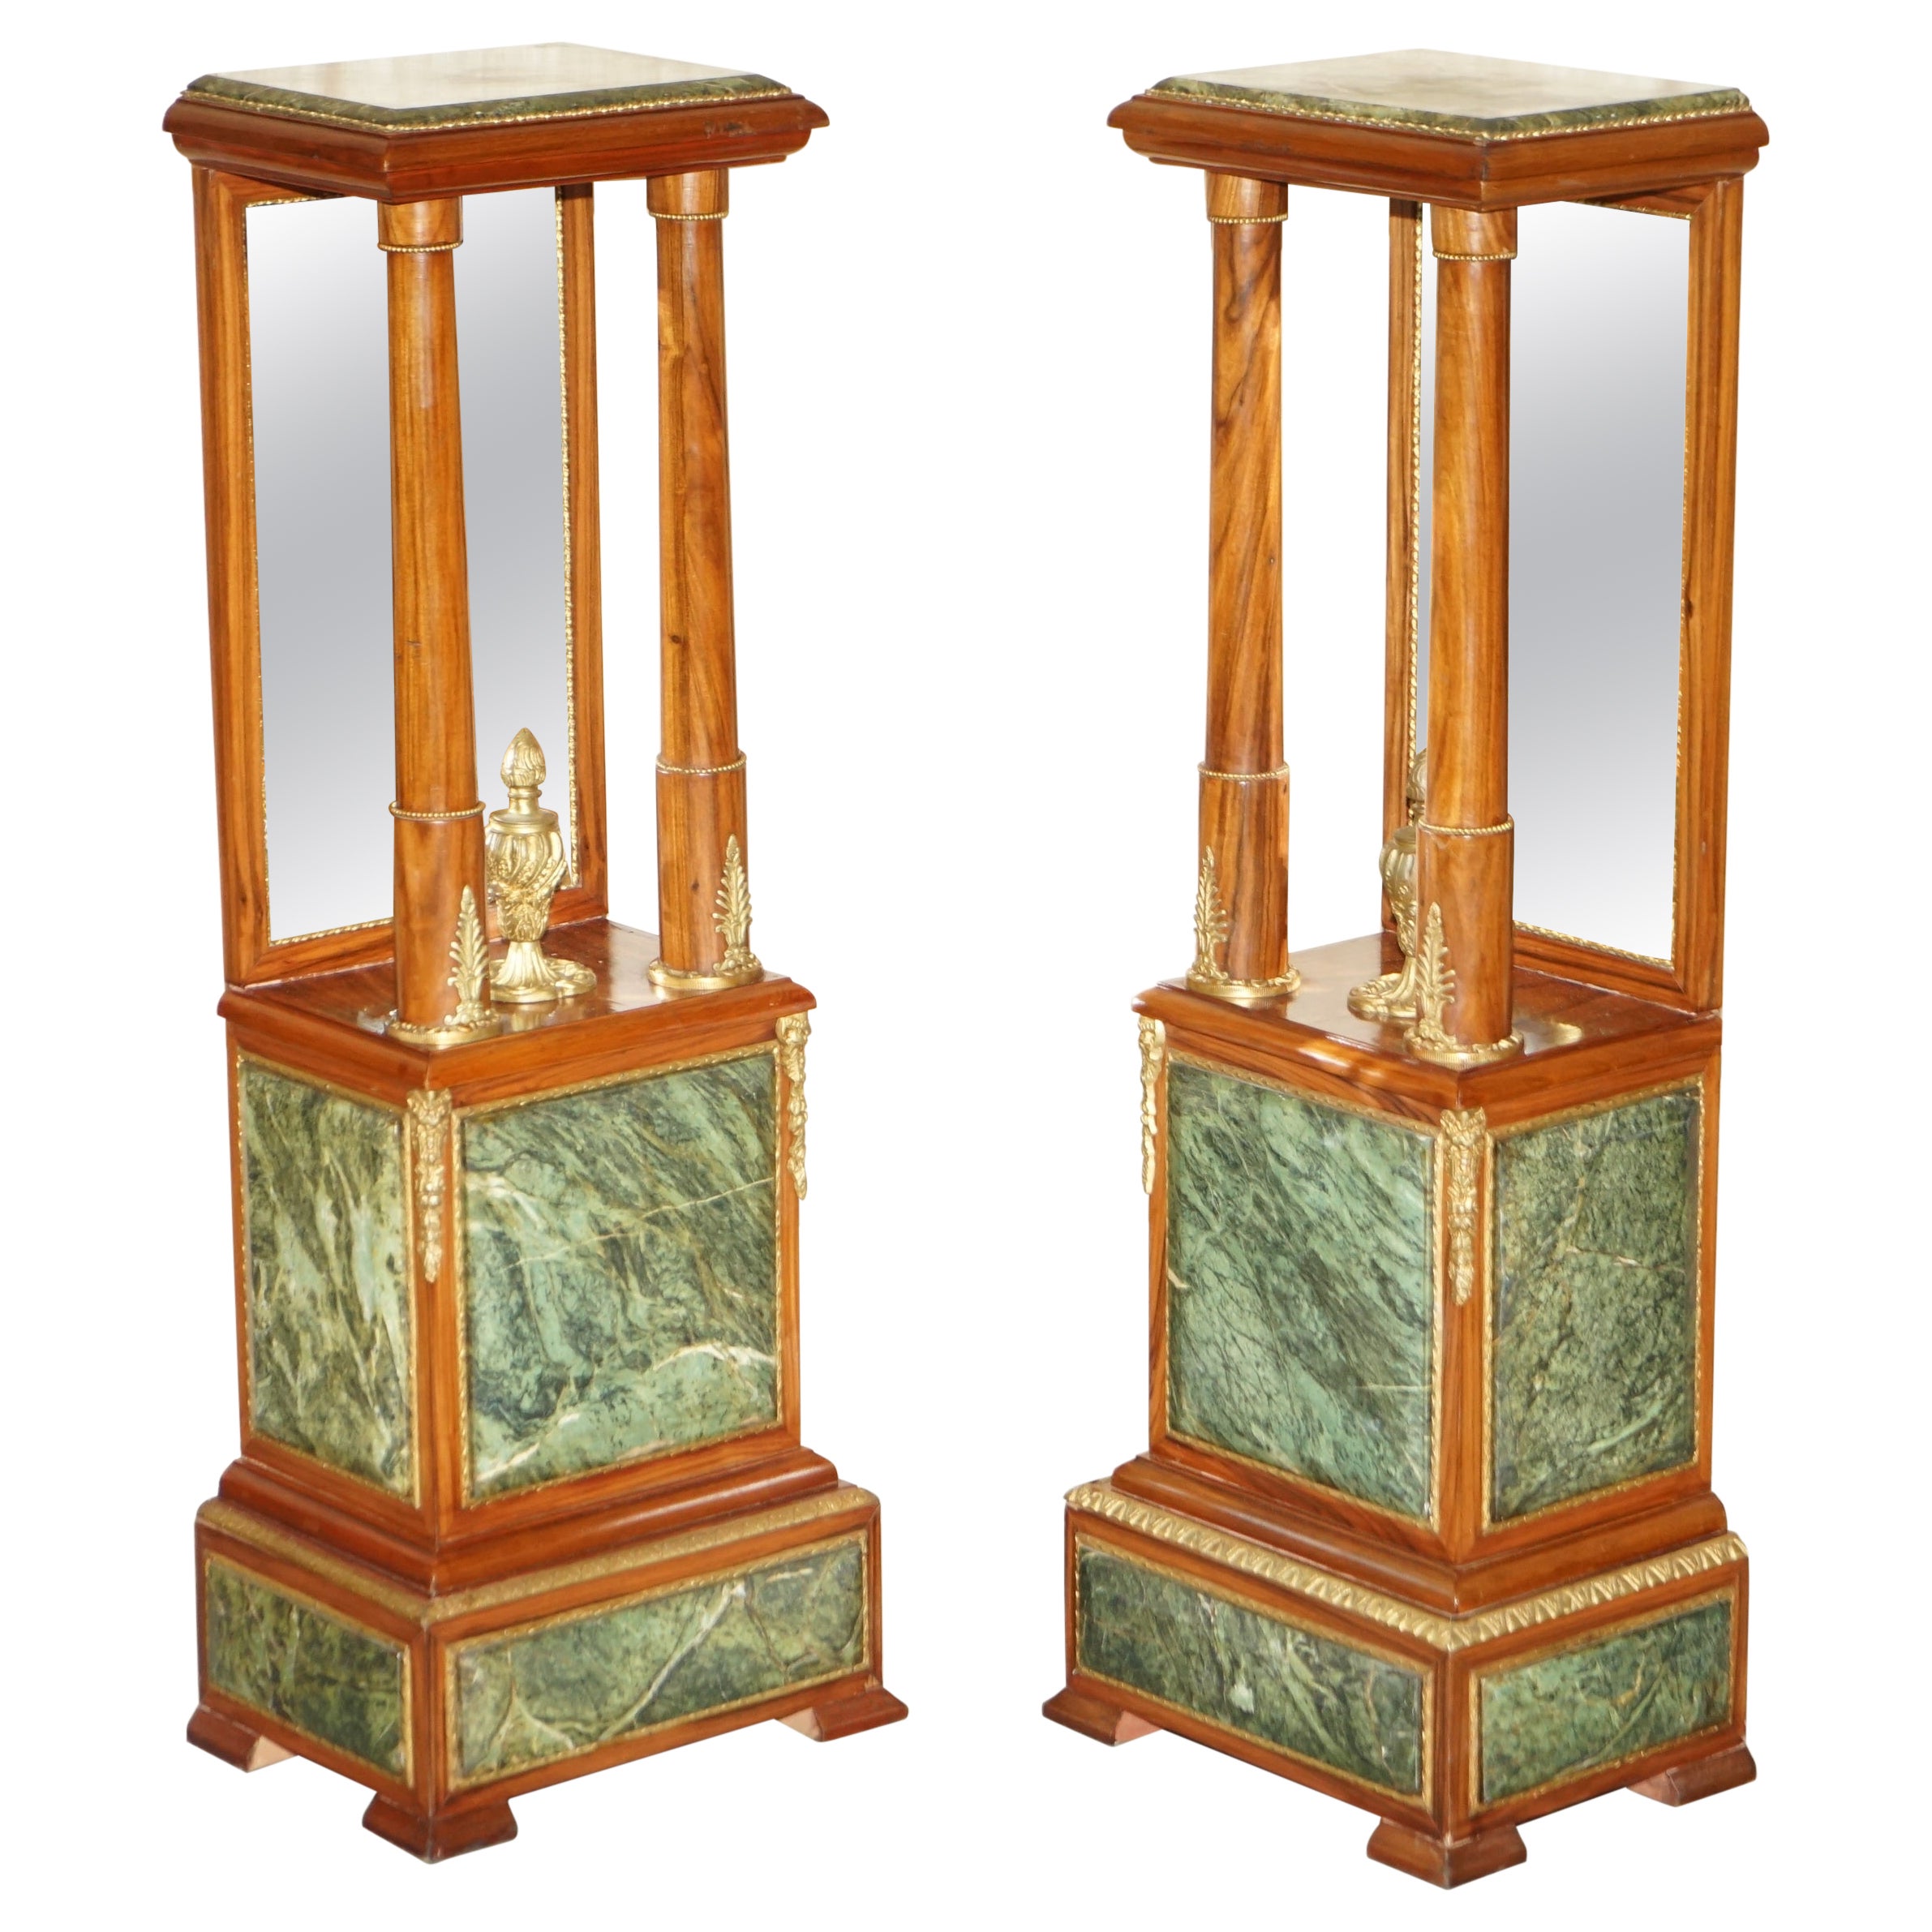 Pair of Antique Gilt Bronze Mounted Walnut Green Marble Topped Pedestal Stands For Sale